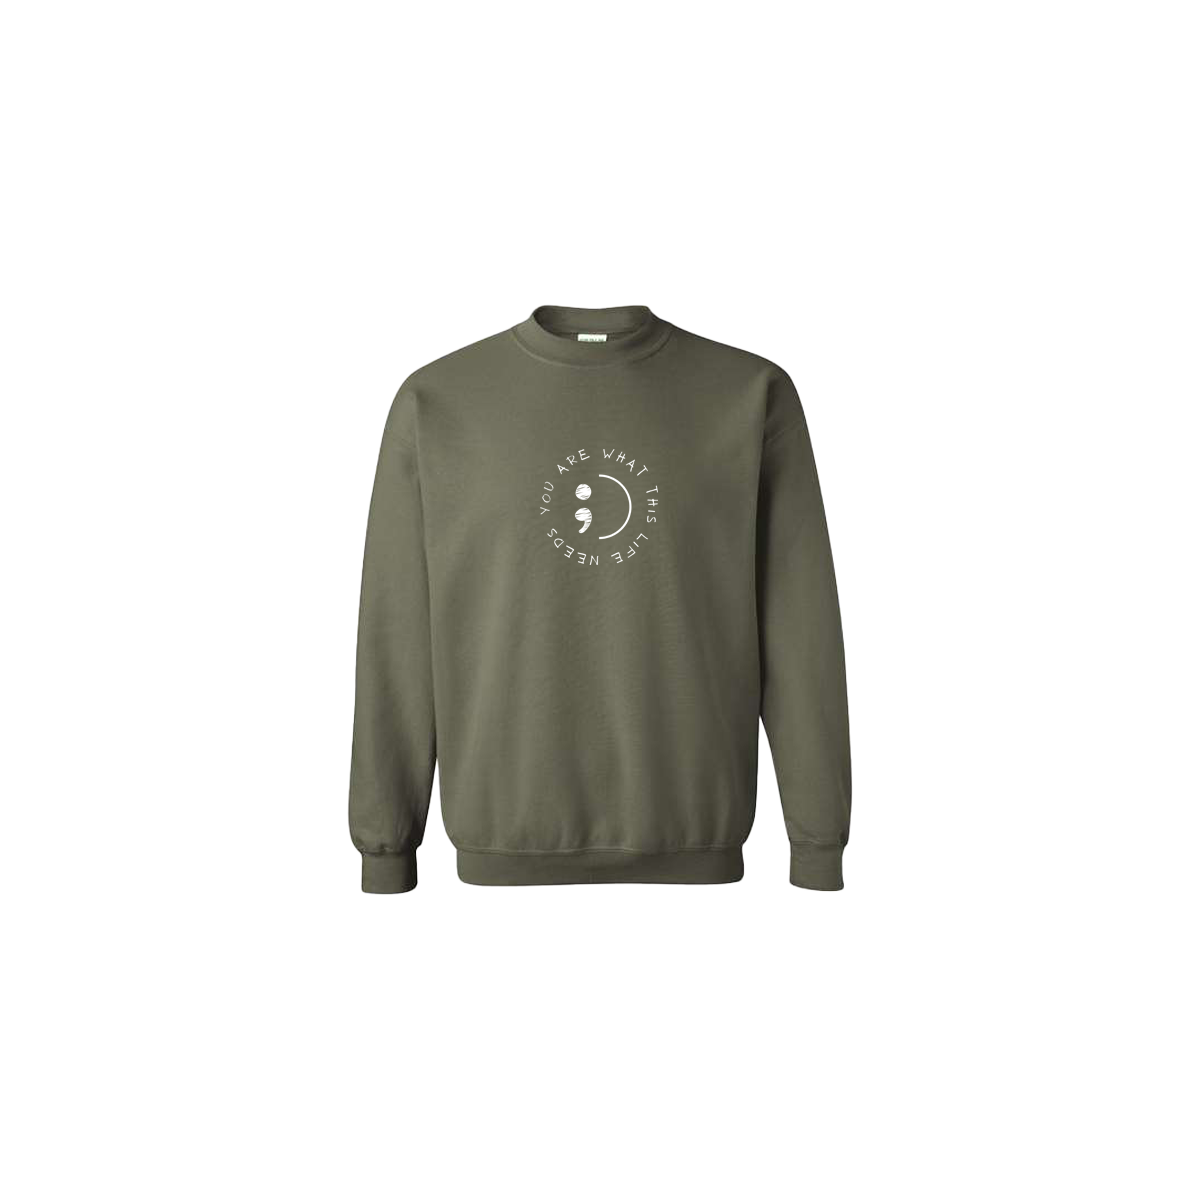 You Are What This Life Needs Embroidered ArmyGreen Crewneck - Mental Health Awareness Clothing